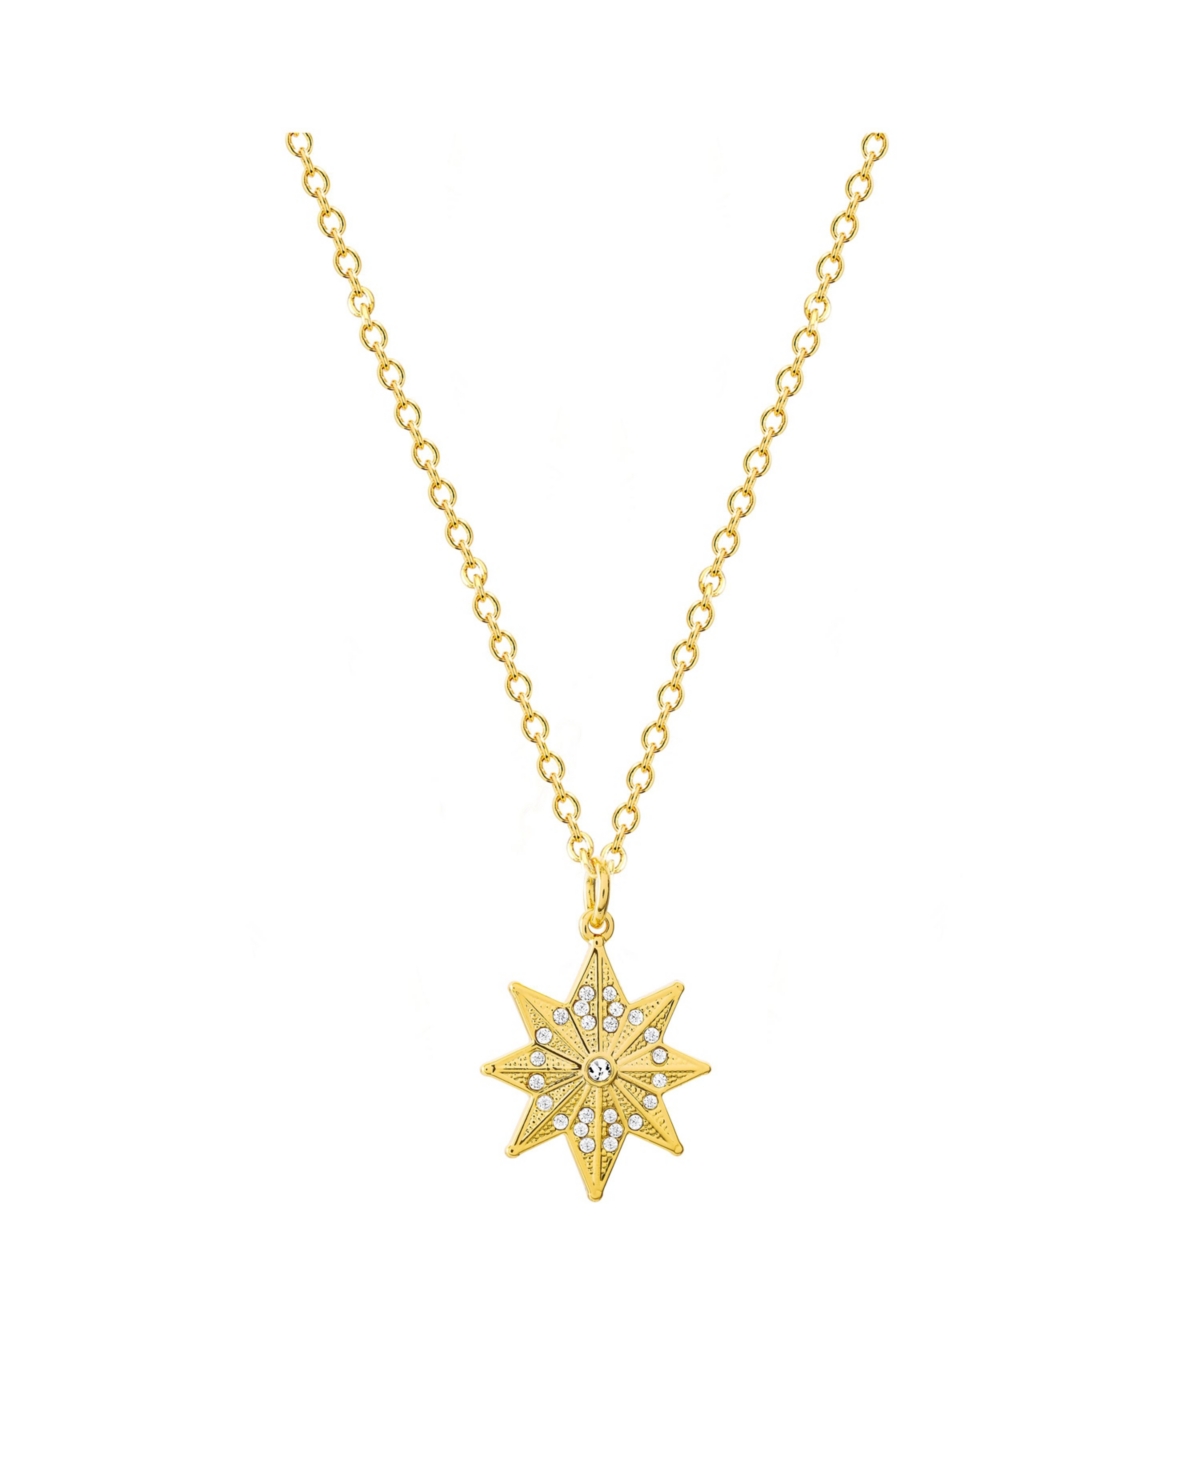 s Captain Hala Star Yellow Gold Plated Crystal Necklace, 18" chain - Gold tone